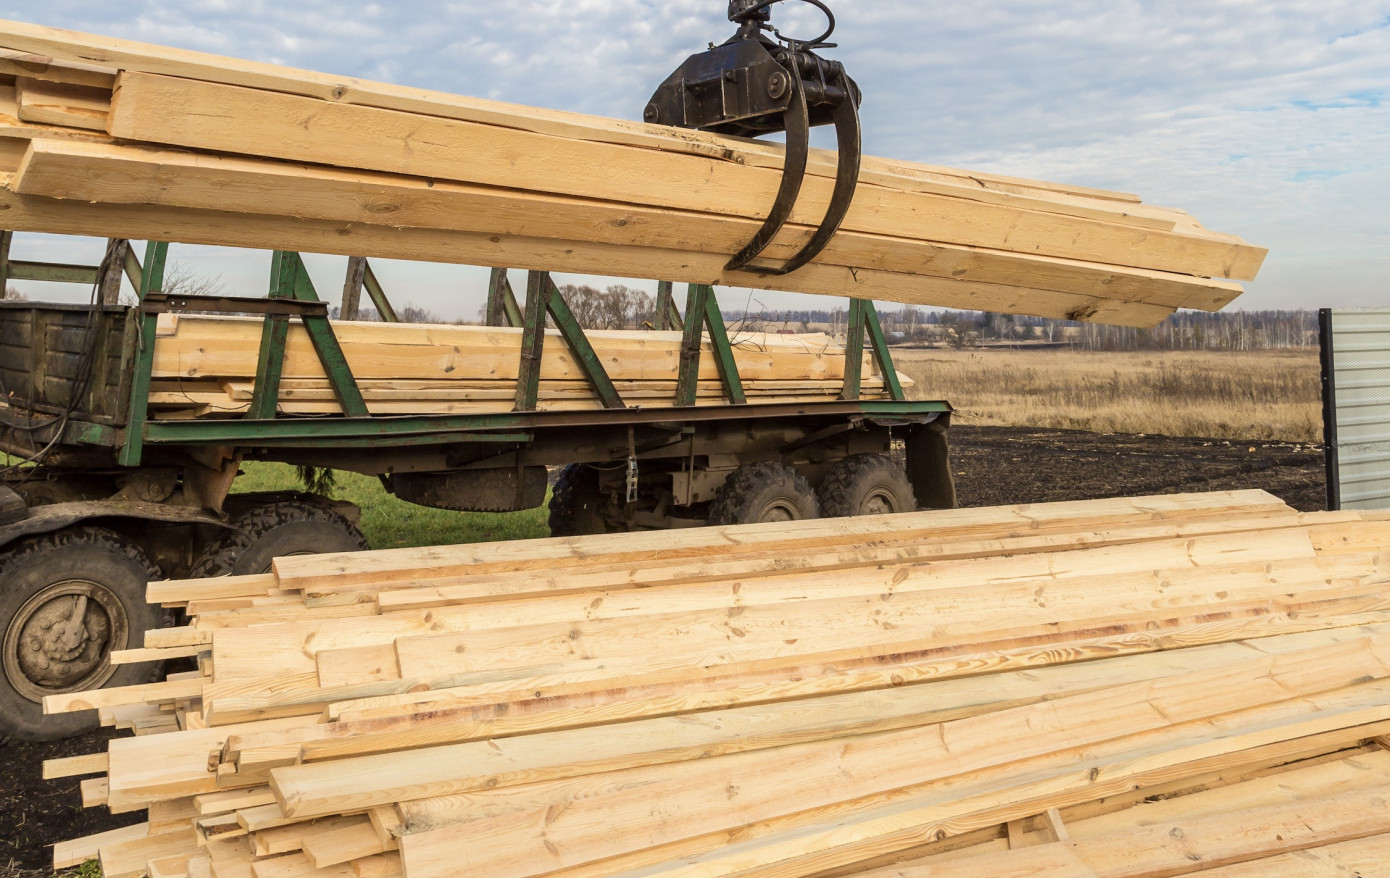 In February, price for softwood lumber imported to China rises 2%